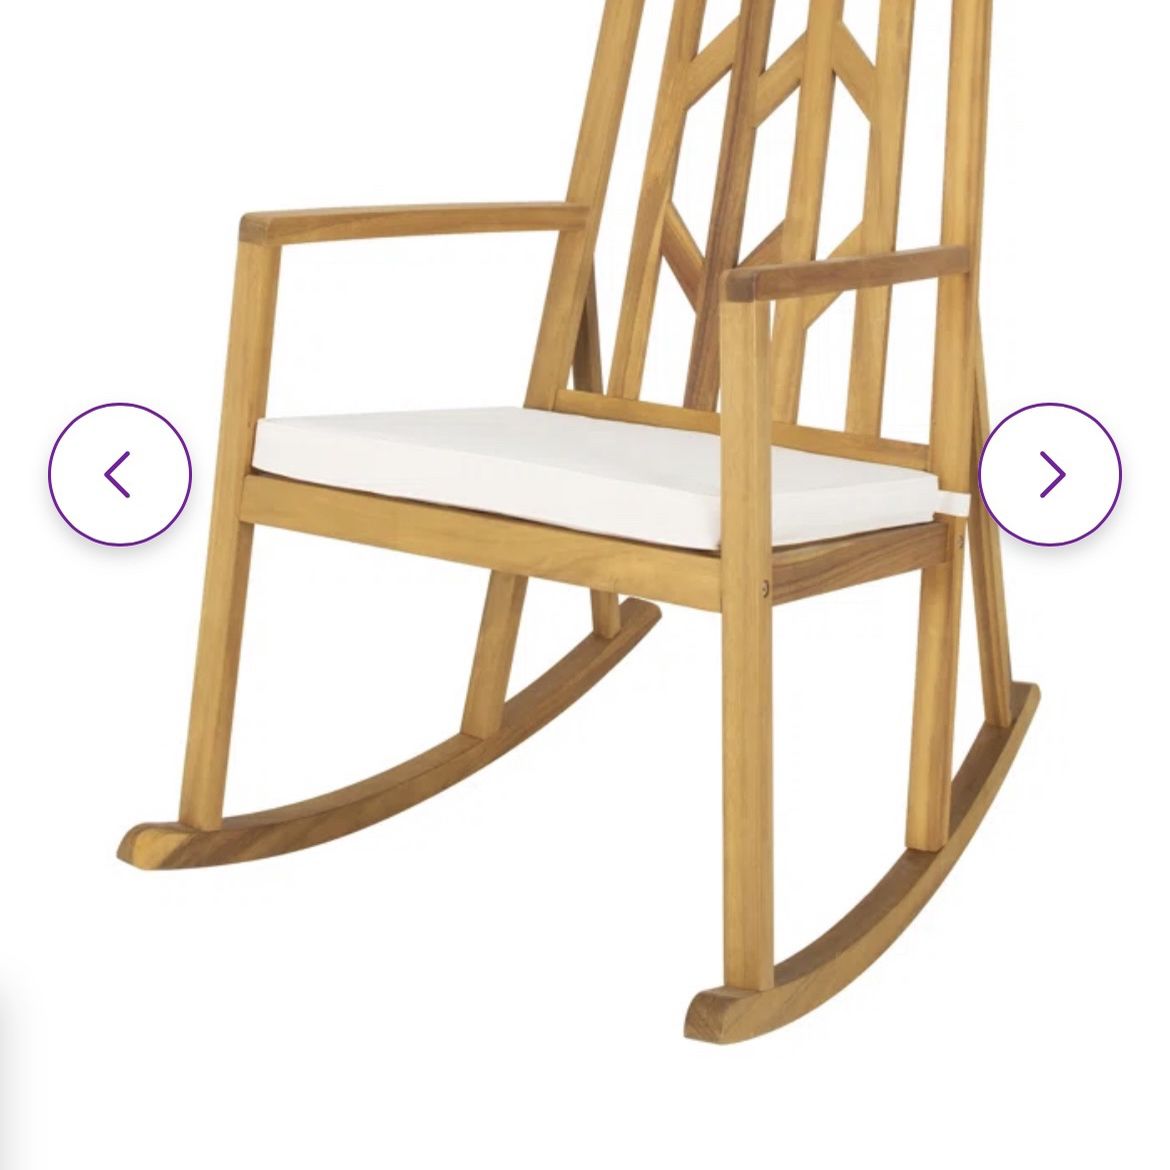 ONE BRAND NEW OUTDOOR ROCKING CHAIR